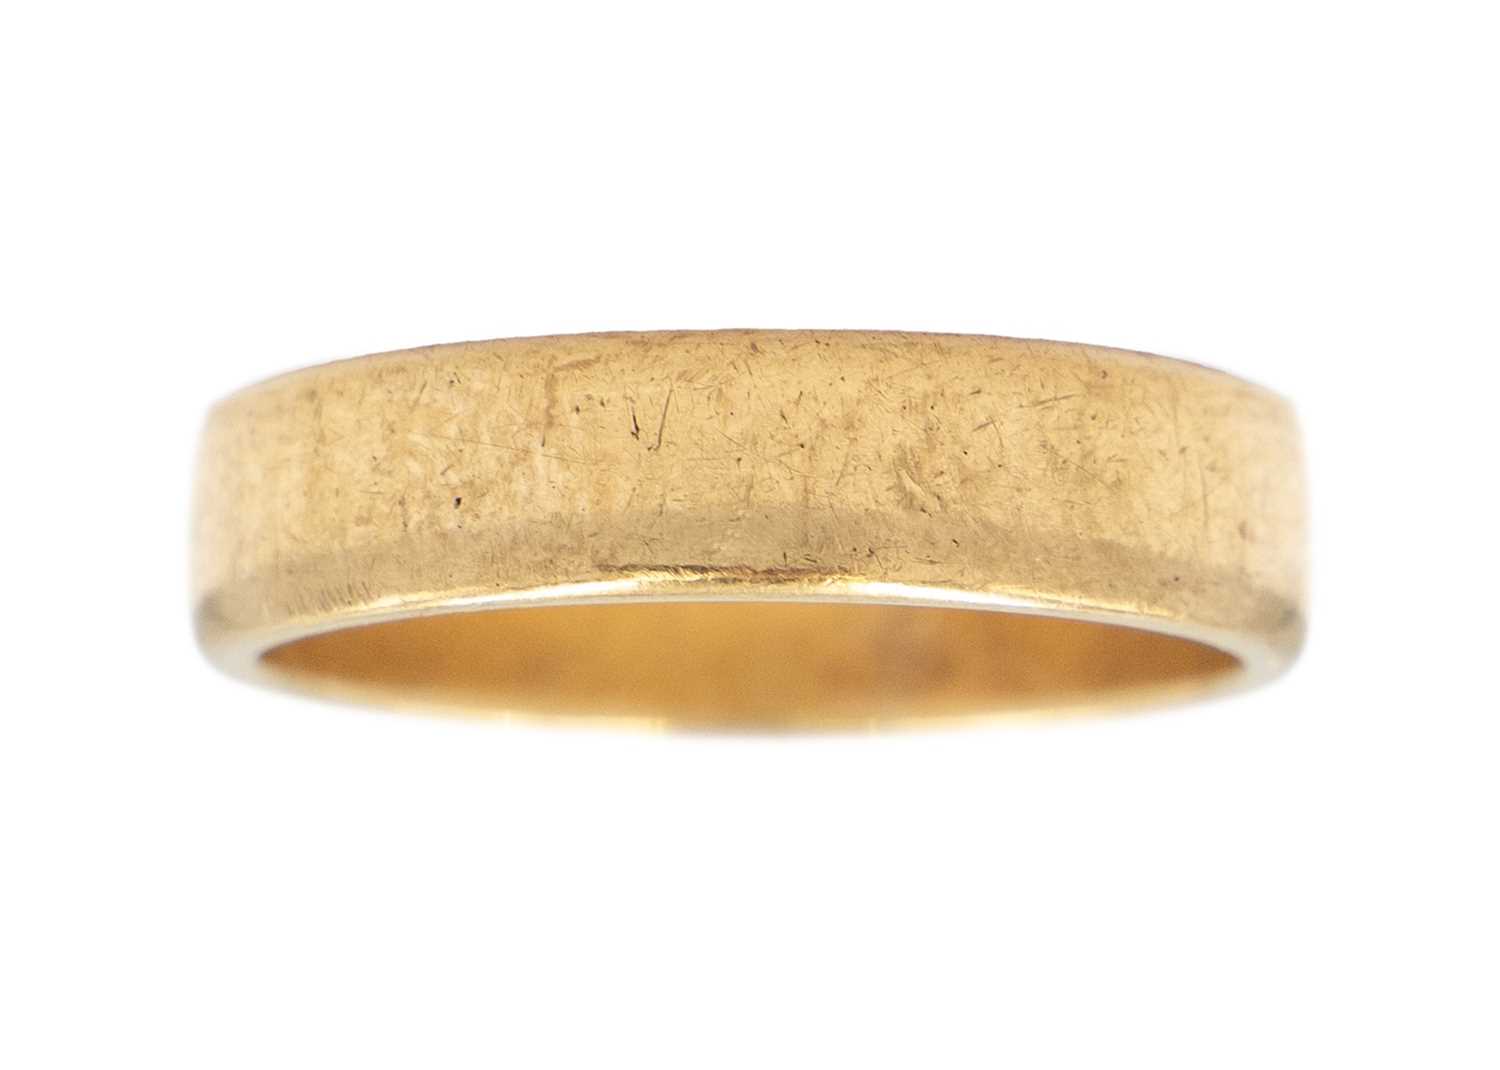 A heavy 9ct (tested) band ring.